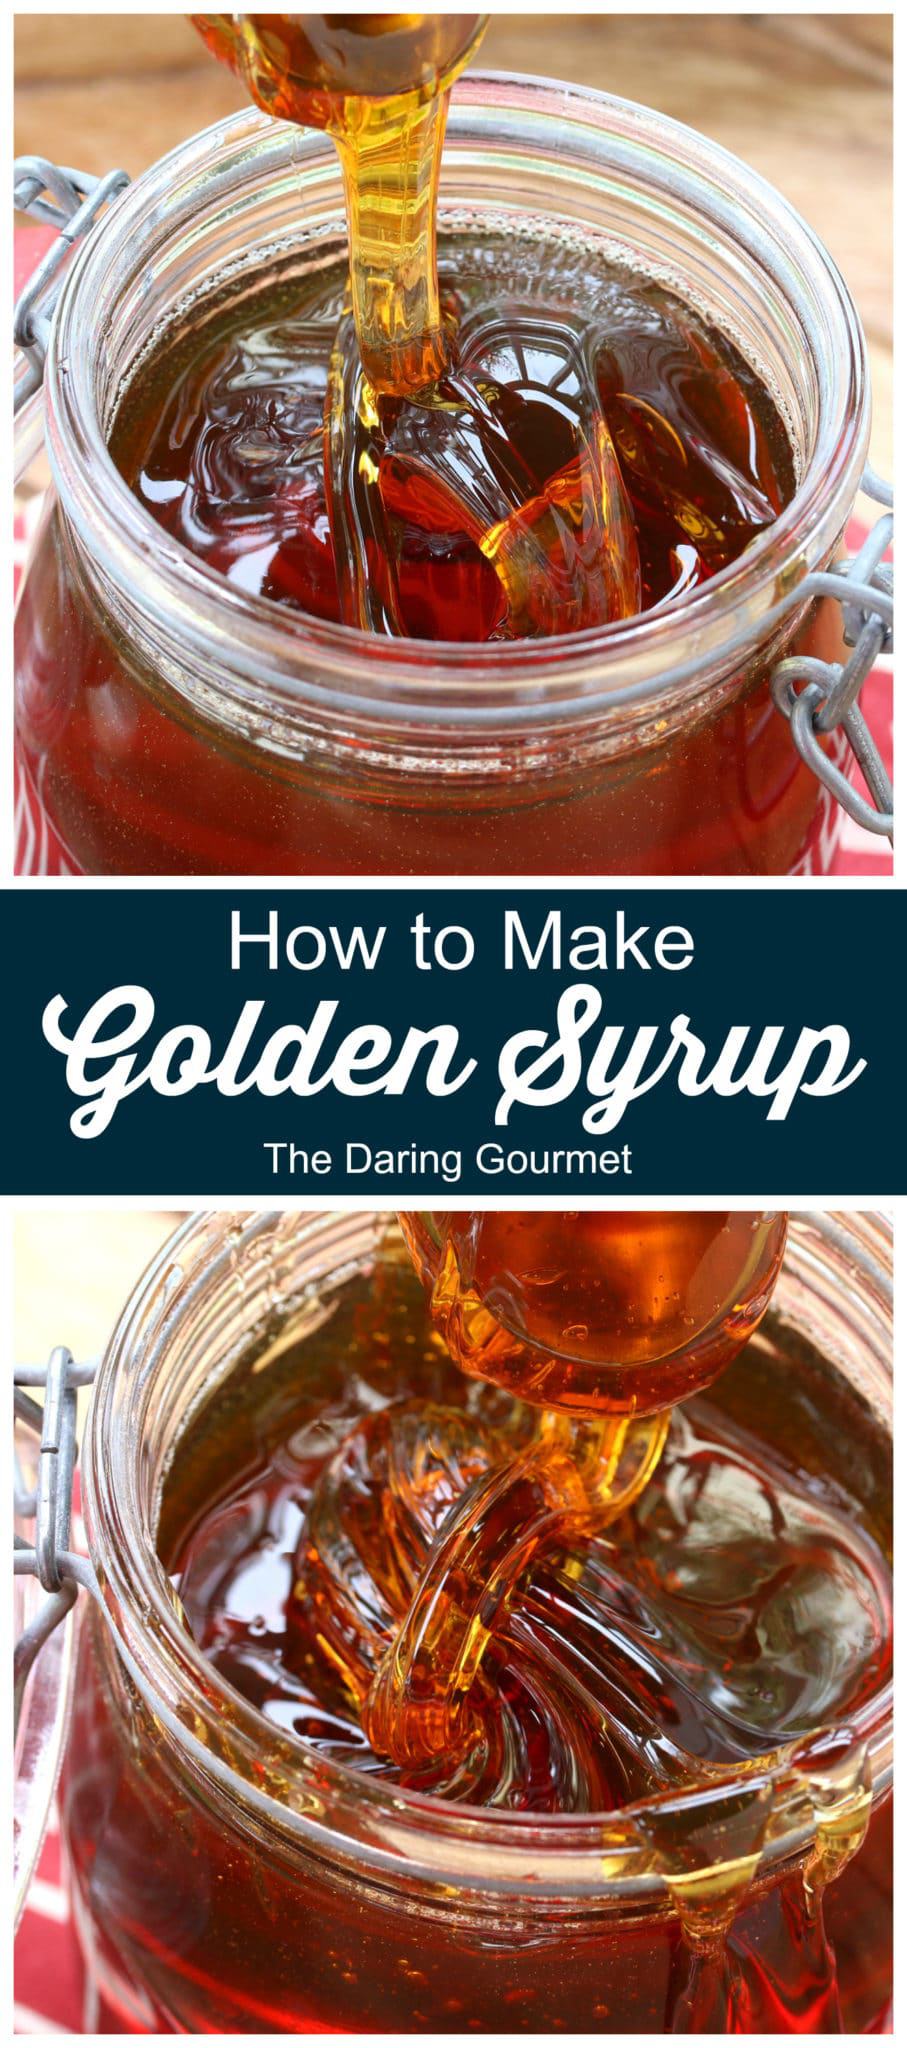 golden syrup how to make homemade recipe light treacle Lyle's copycat British English